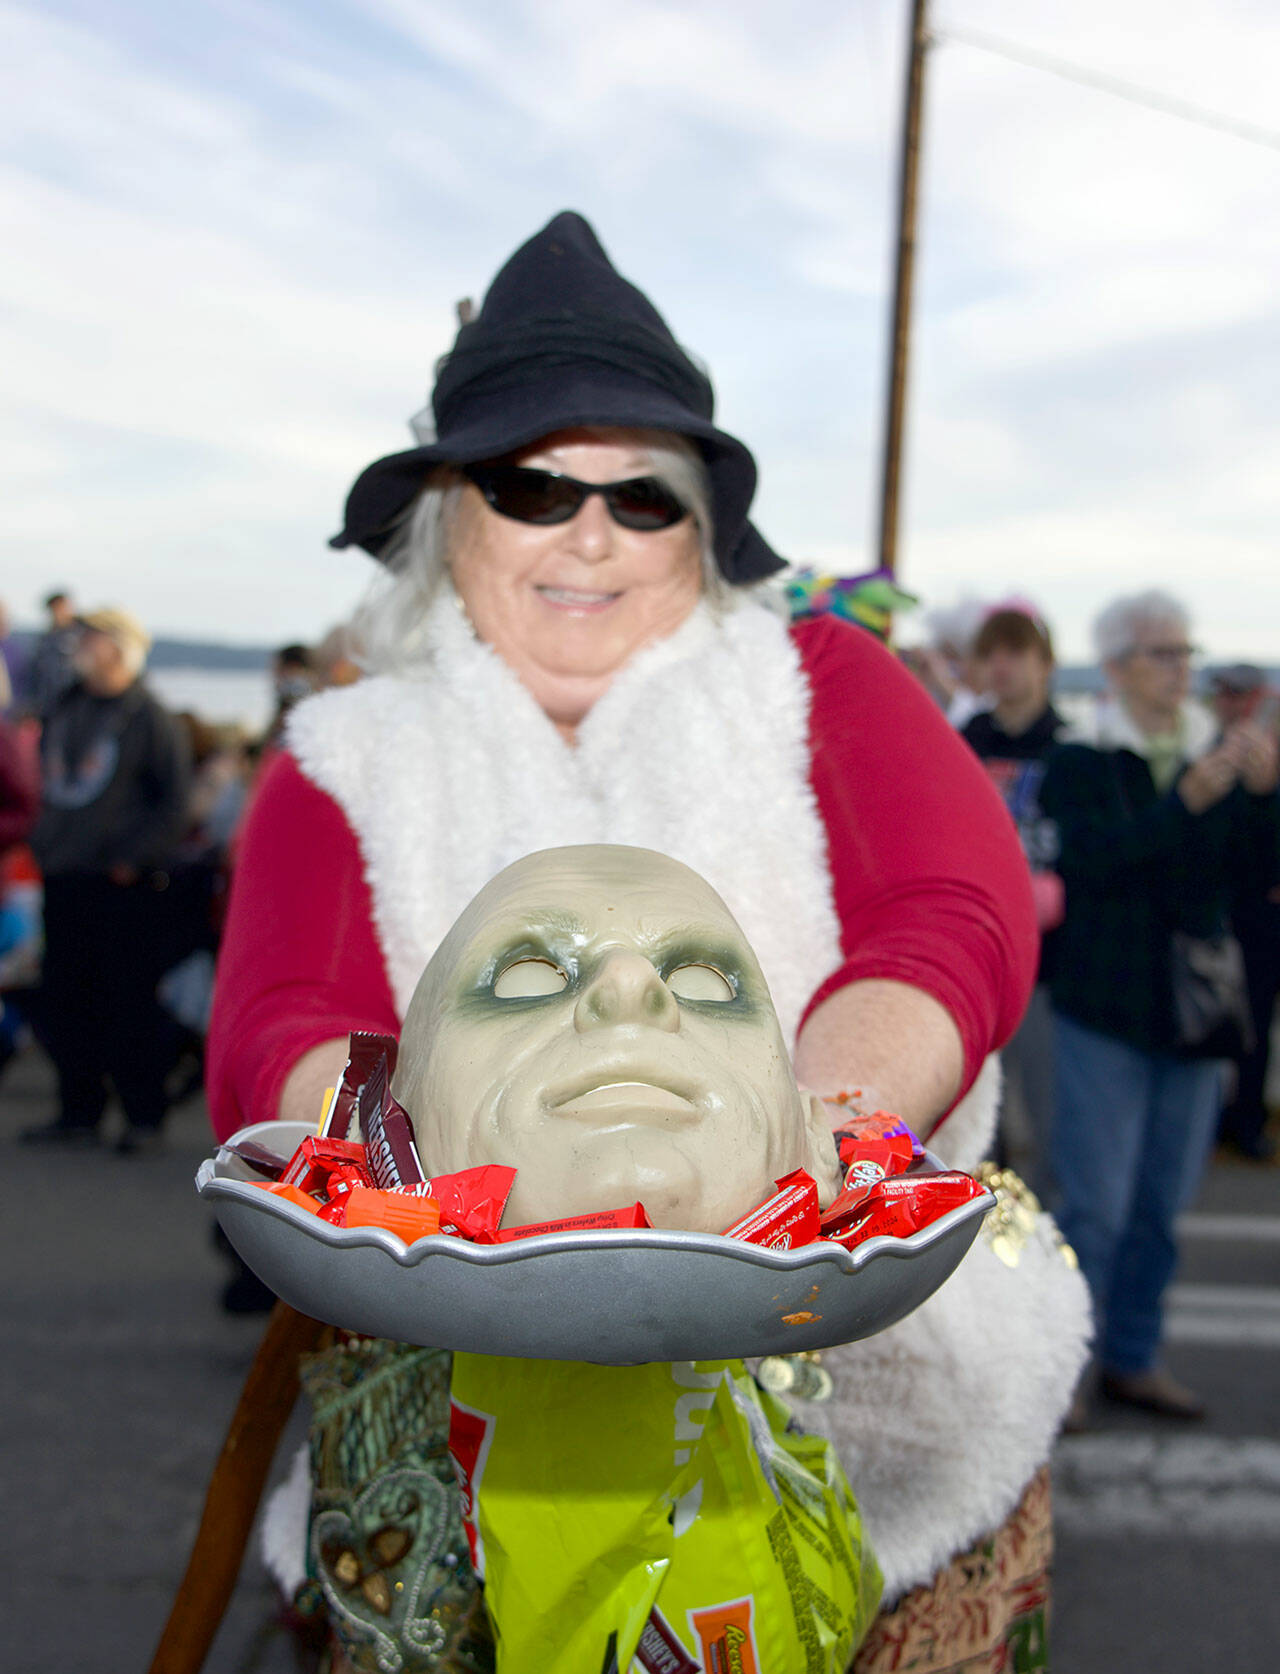 Druze Hartwell of Port Townsend holds a bowl with a mask in the middle before marching in the 27th Port Townsend Main Street Program Trick or Treat and Costume Parade in downtown Port Townsend on Tuesday. (Steve Mullensky/for Peninsula Daily News)